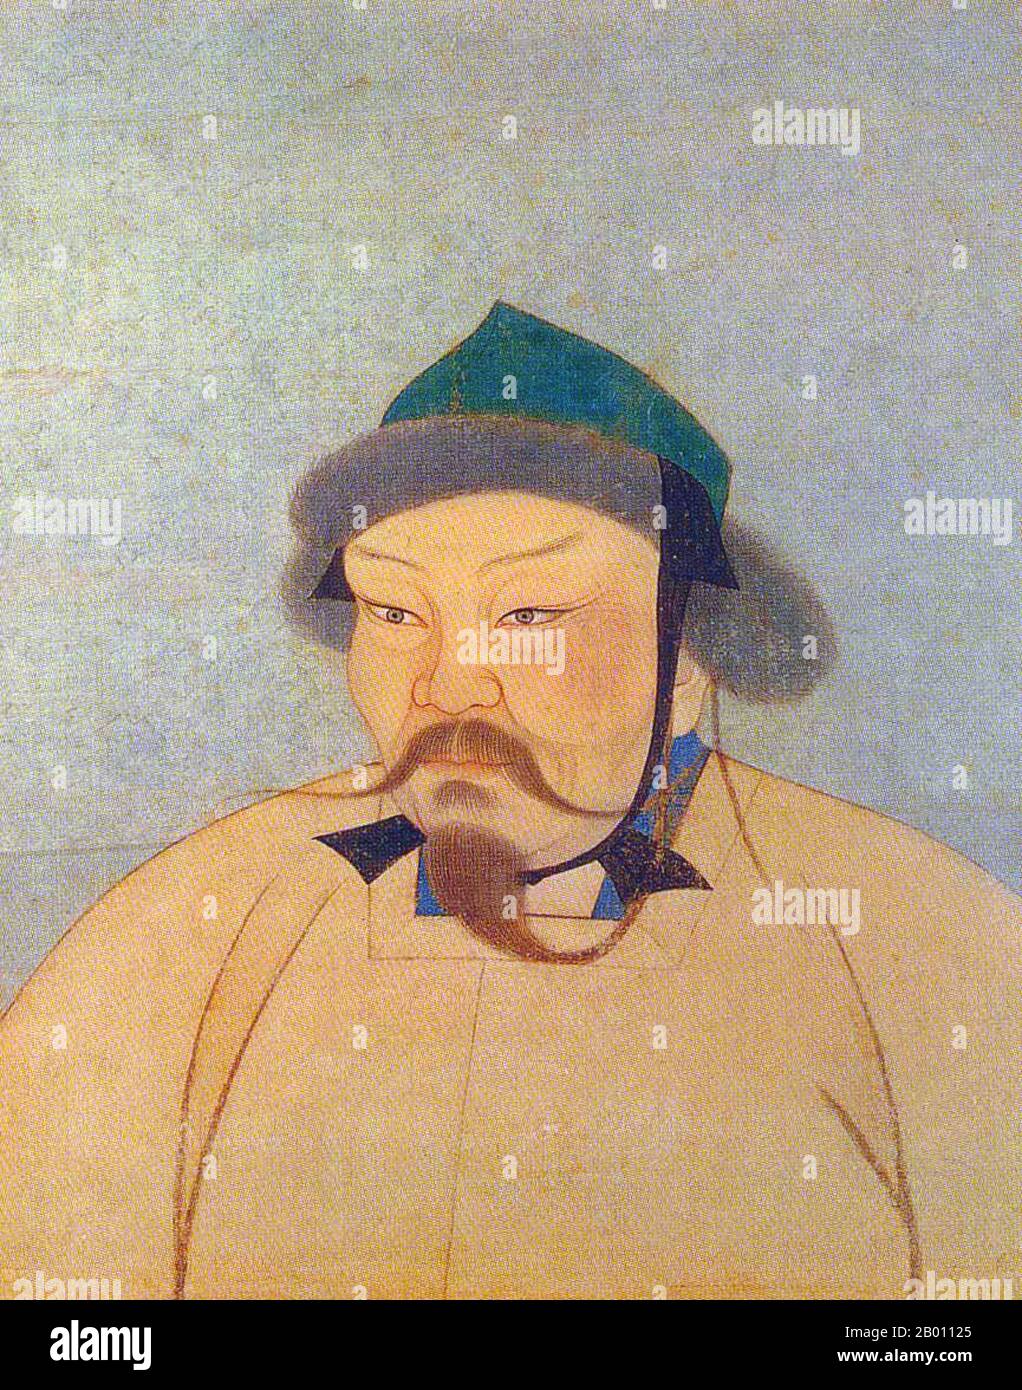 Mongolia: Ogedei Khan (r.1229-1241), 2nd Khagan of the Mongol Empire. Ink on silk album portrait, 14th century.  Ogedei Khan (c. 1186 – December 11, 1241) was the third son of Genghis Khan and second Great Khan (Khagan) of the Mongol Empire by succeeding his father. He continued the expansion of the empire that his father had begun, and was a world figure when the Mongol Empire reached its farthest extent west and south during the invasions of Europe and Asia. Like all of Genghis' primary sons, he participated extensively in conquests in China, Iran and Central Asia. Stock Photo